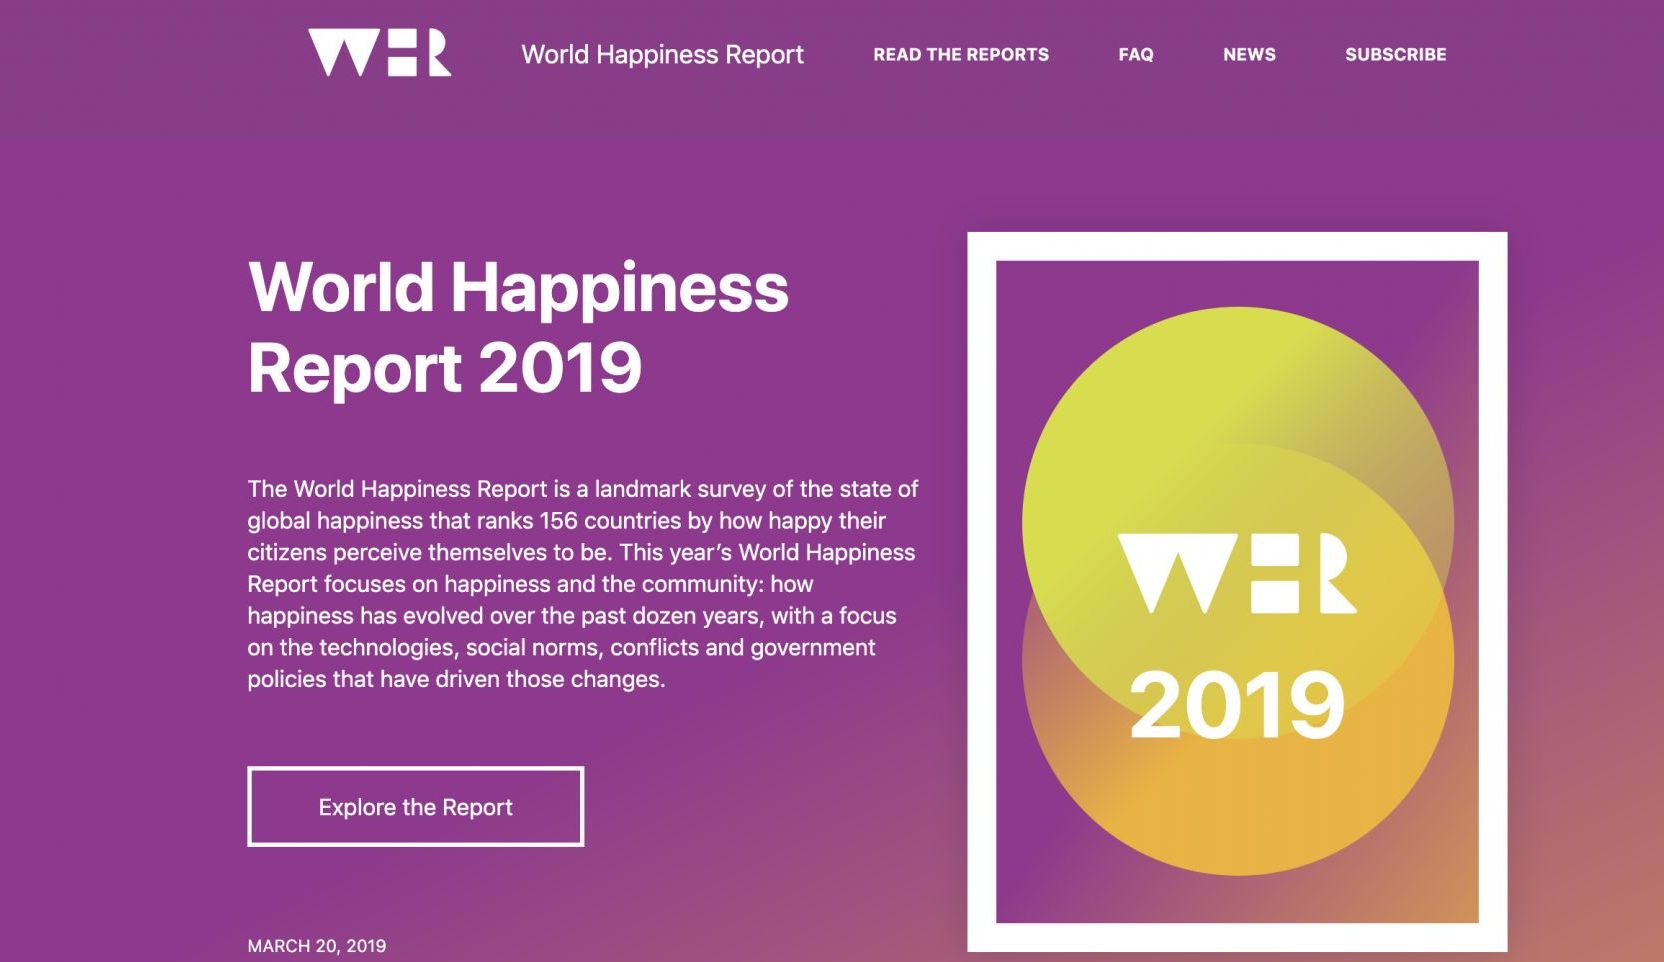 World Happiness Report. Happy Planet Index 2019 method paper. Happiness report